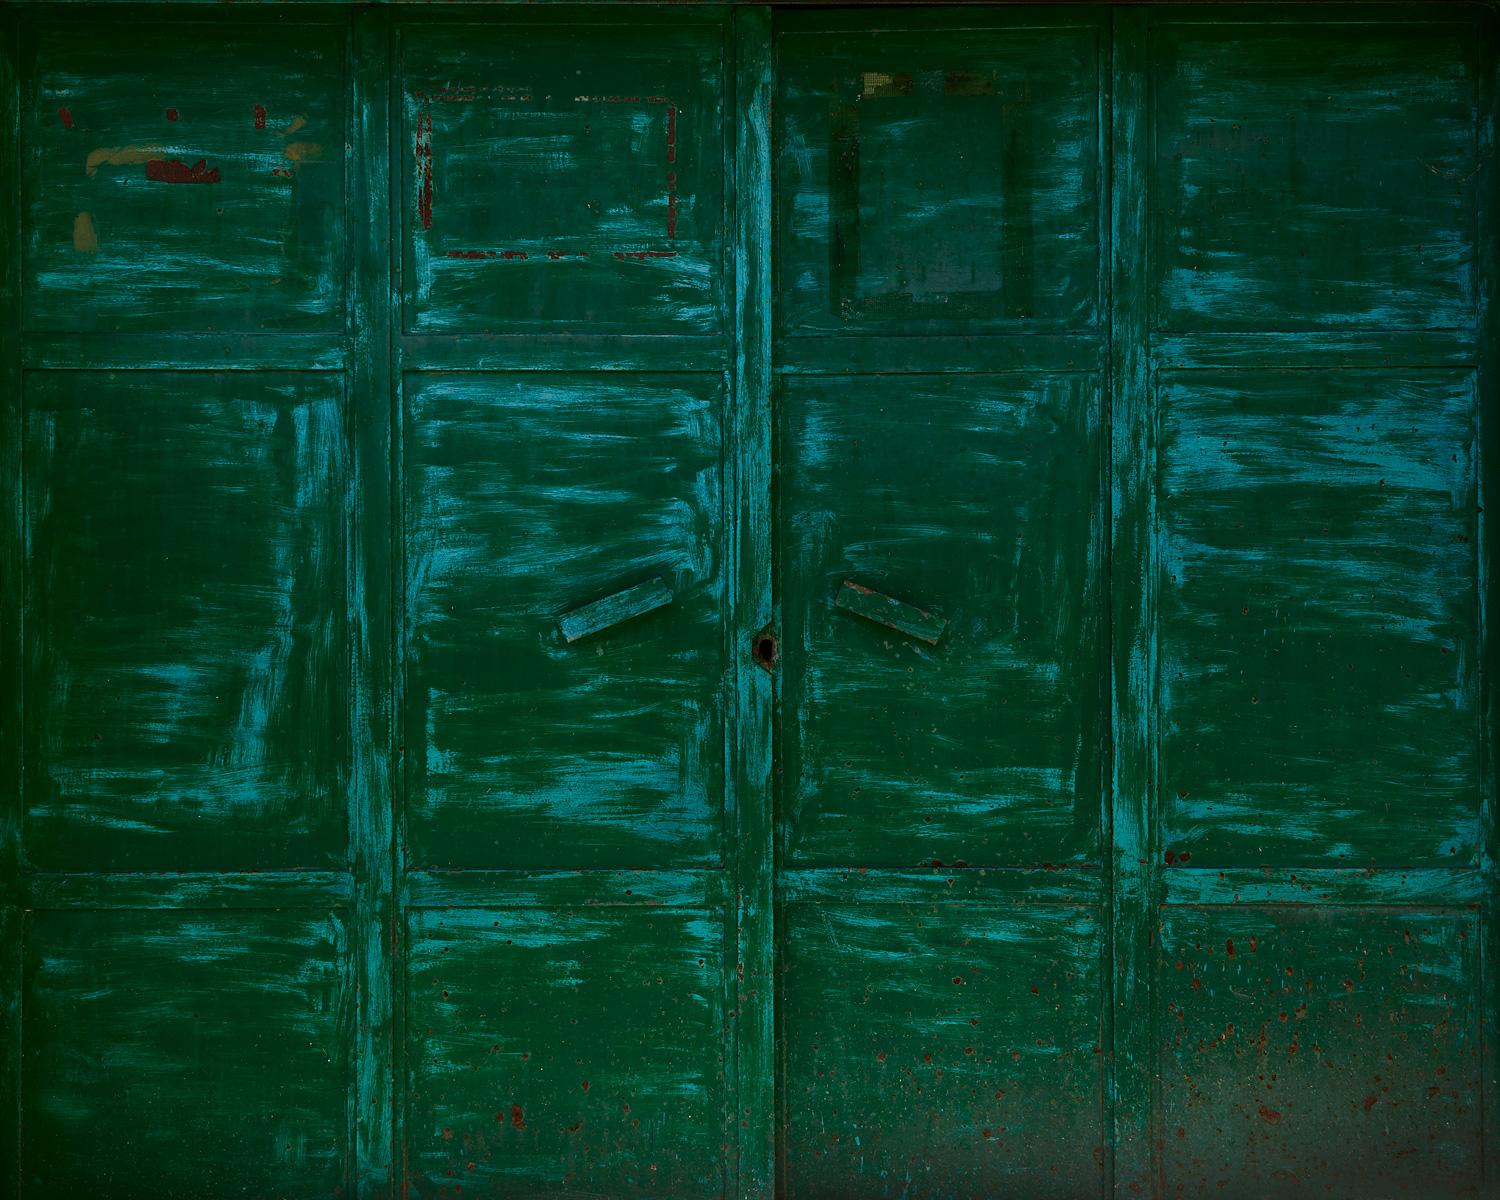 Wallscape VII (Green Door) - abstraction of urban textures and palimpsest colors